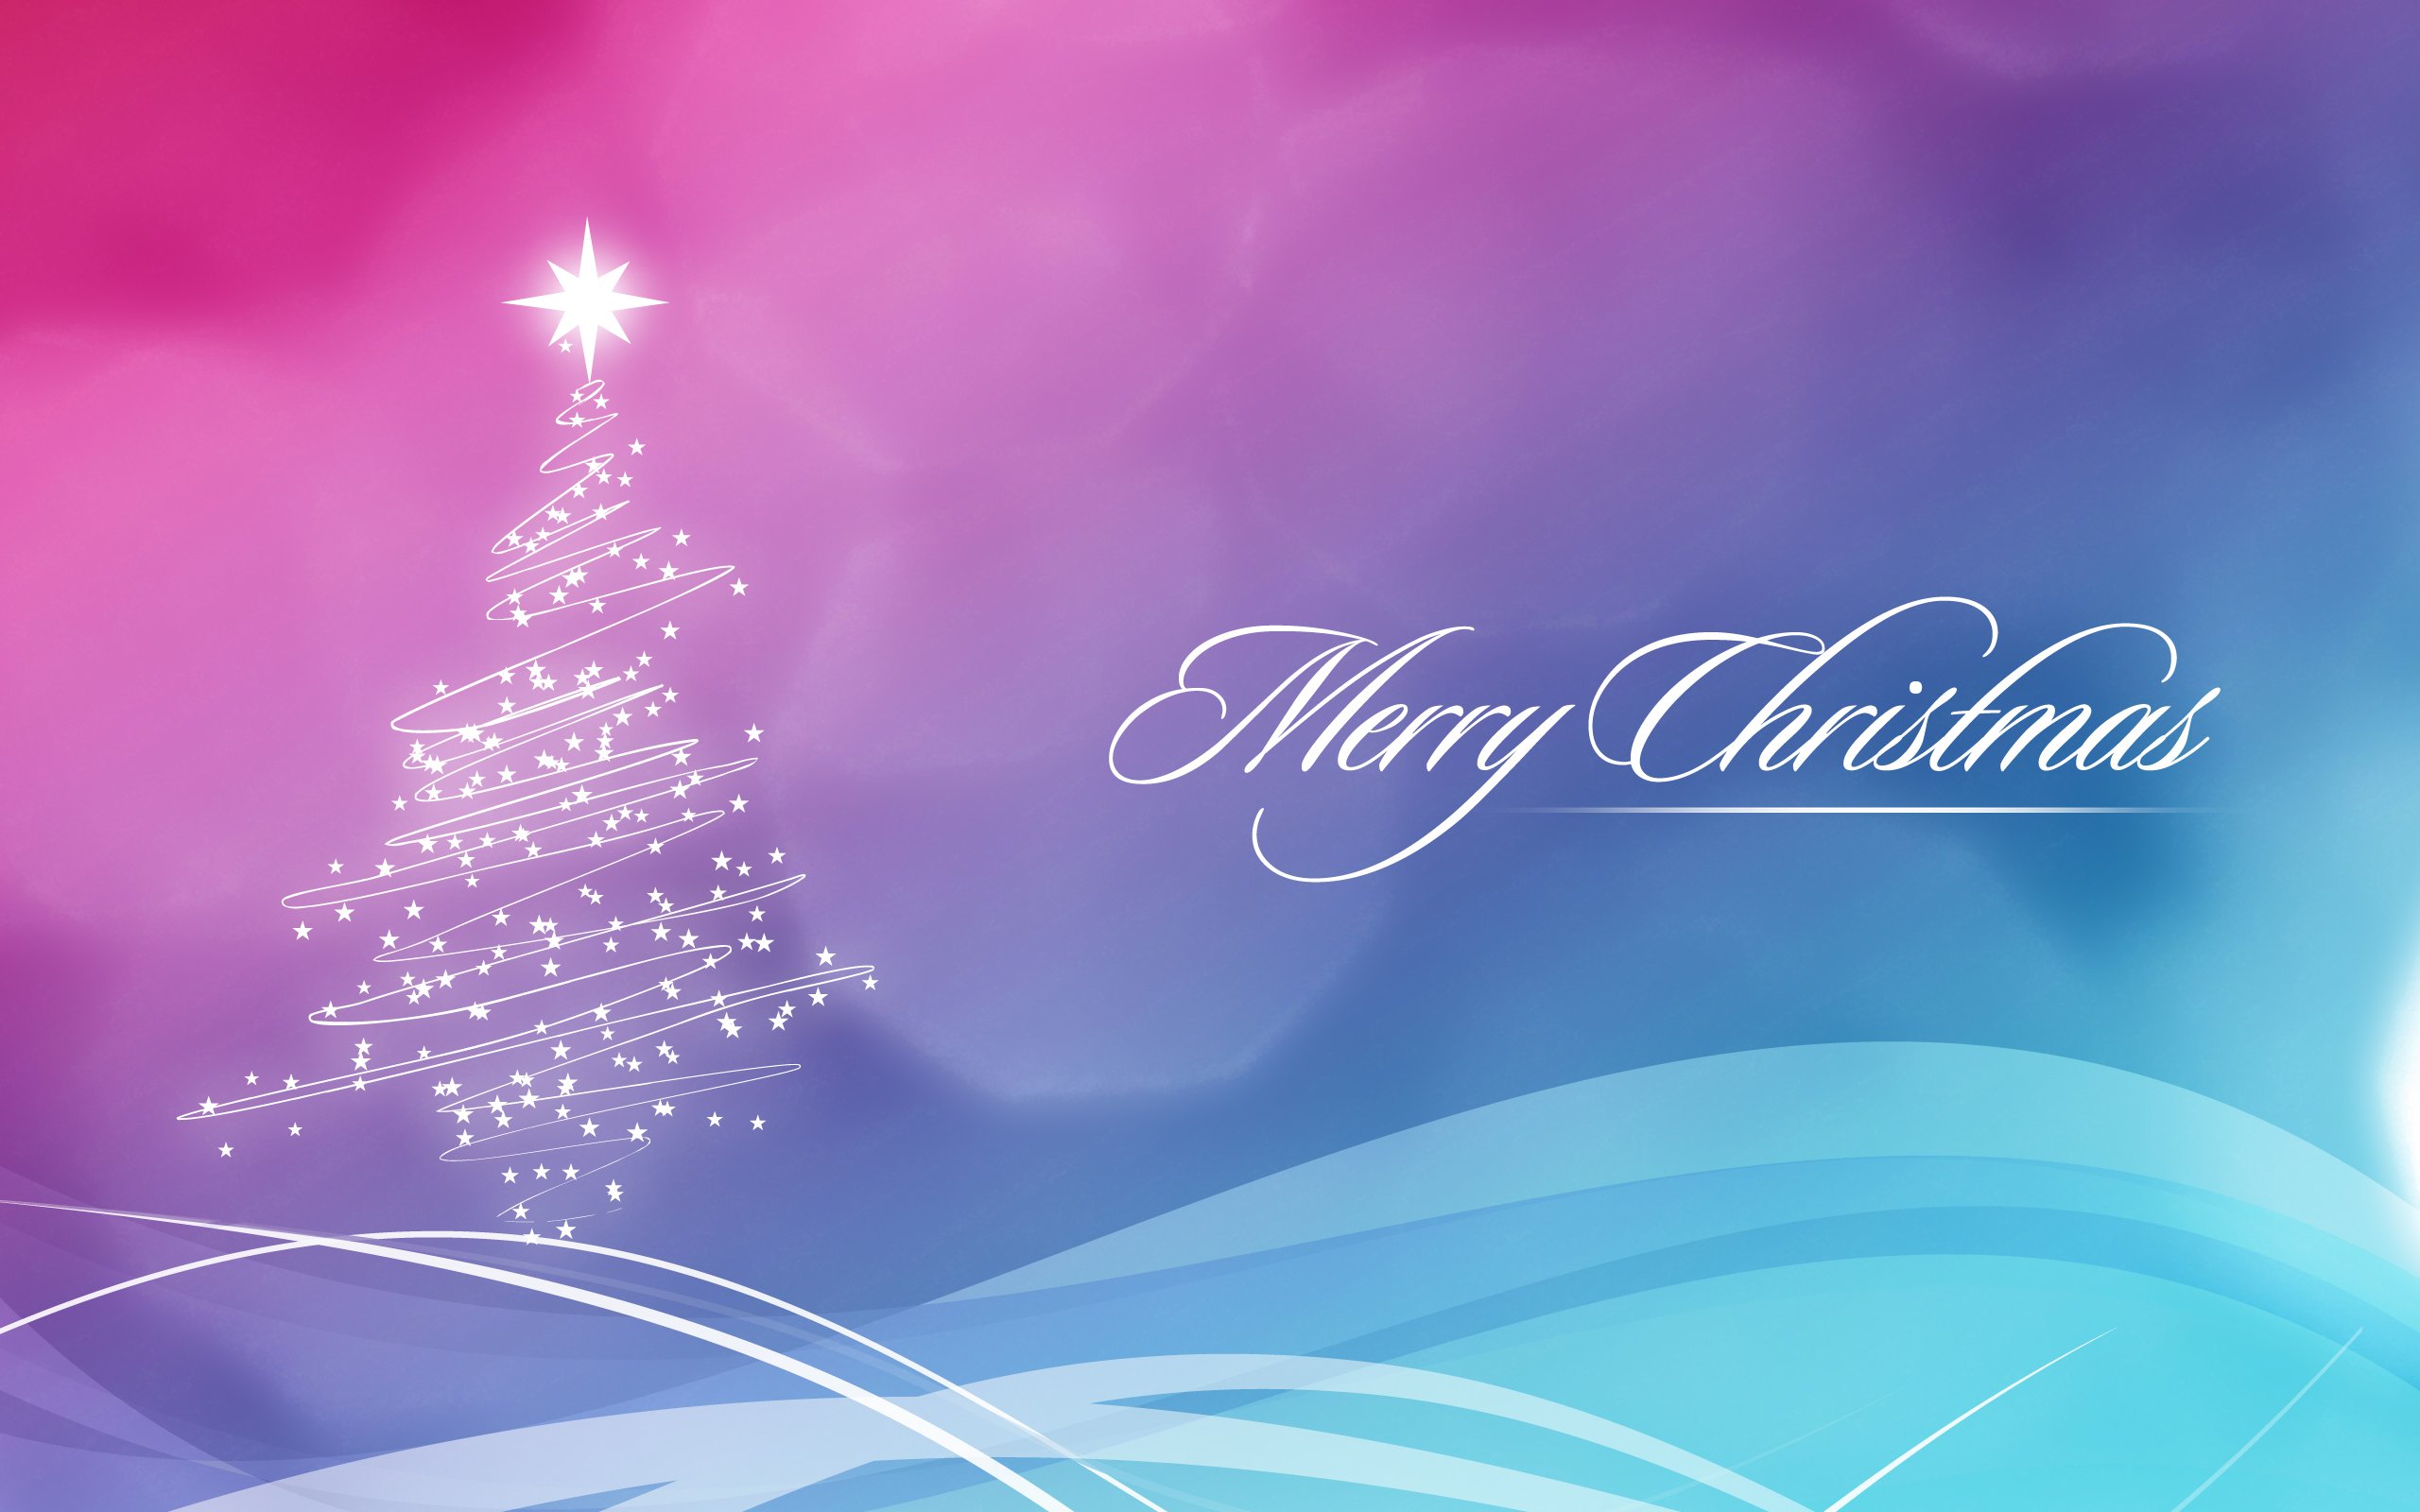 Blue and Pink Christmas Wallpaper YouTube Channel Cover